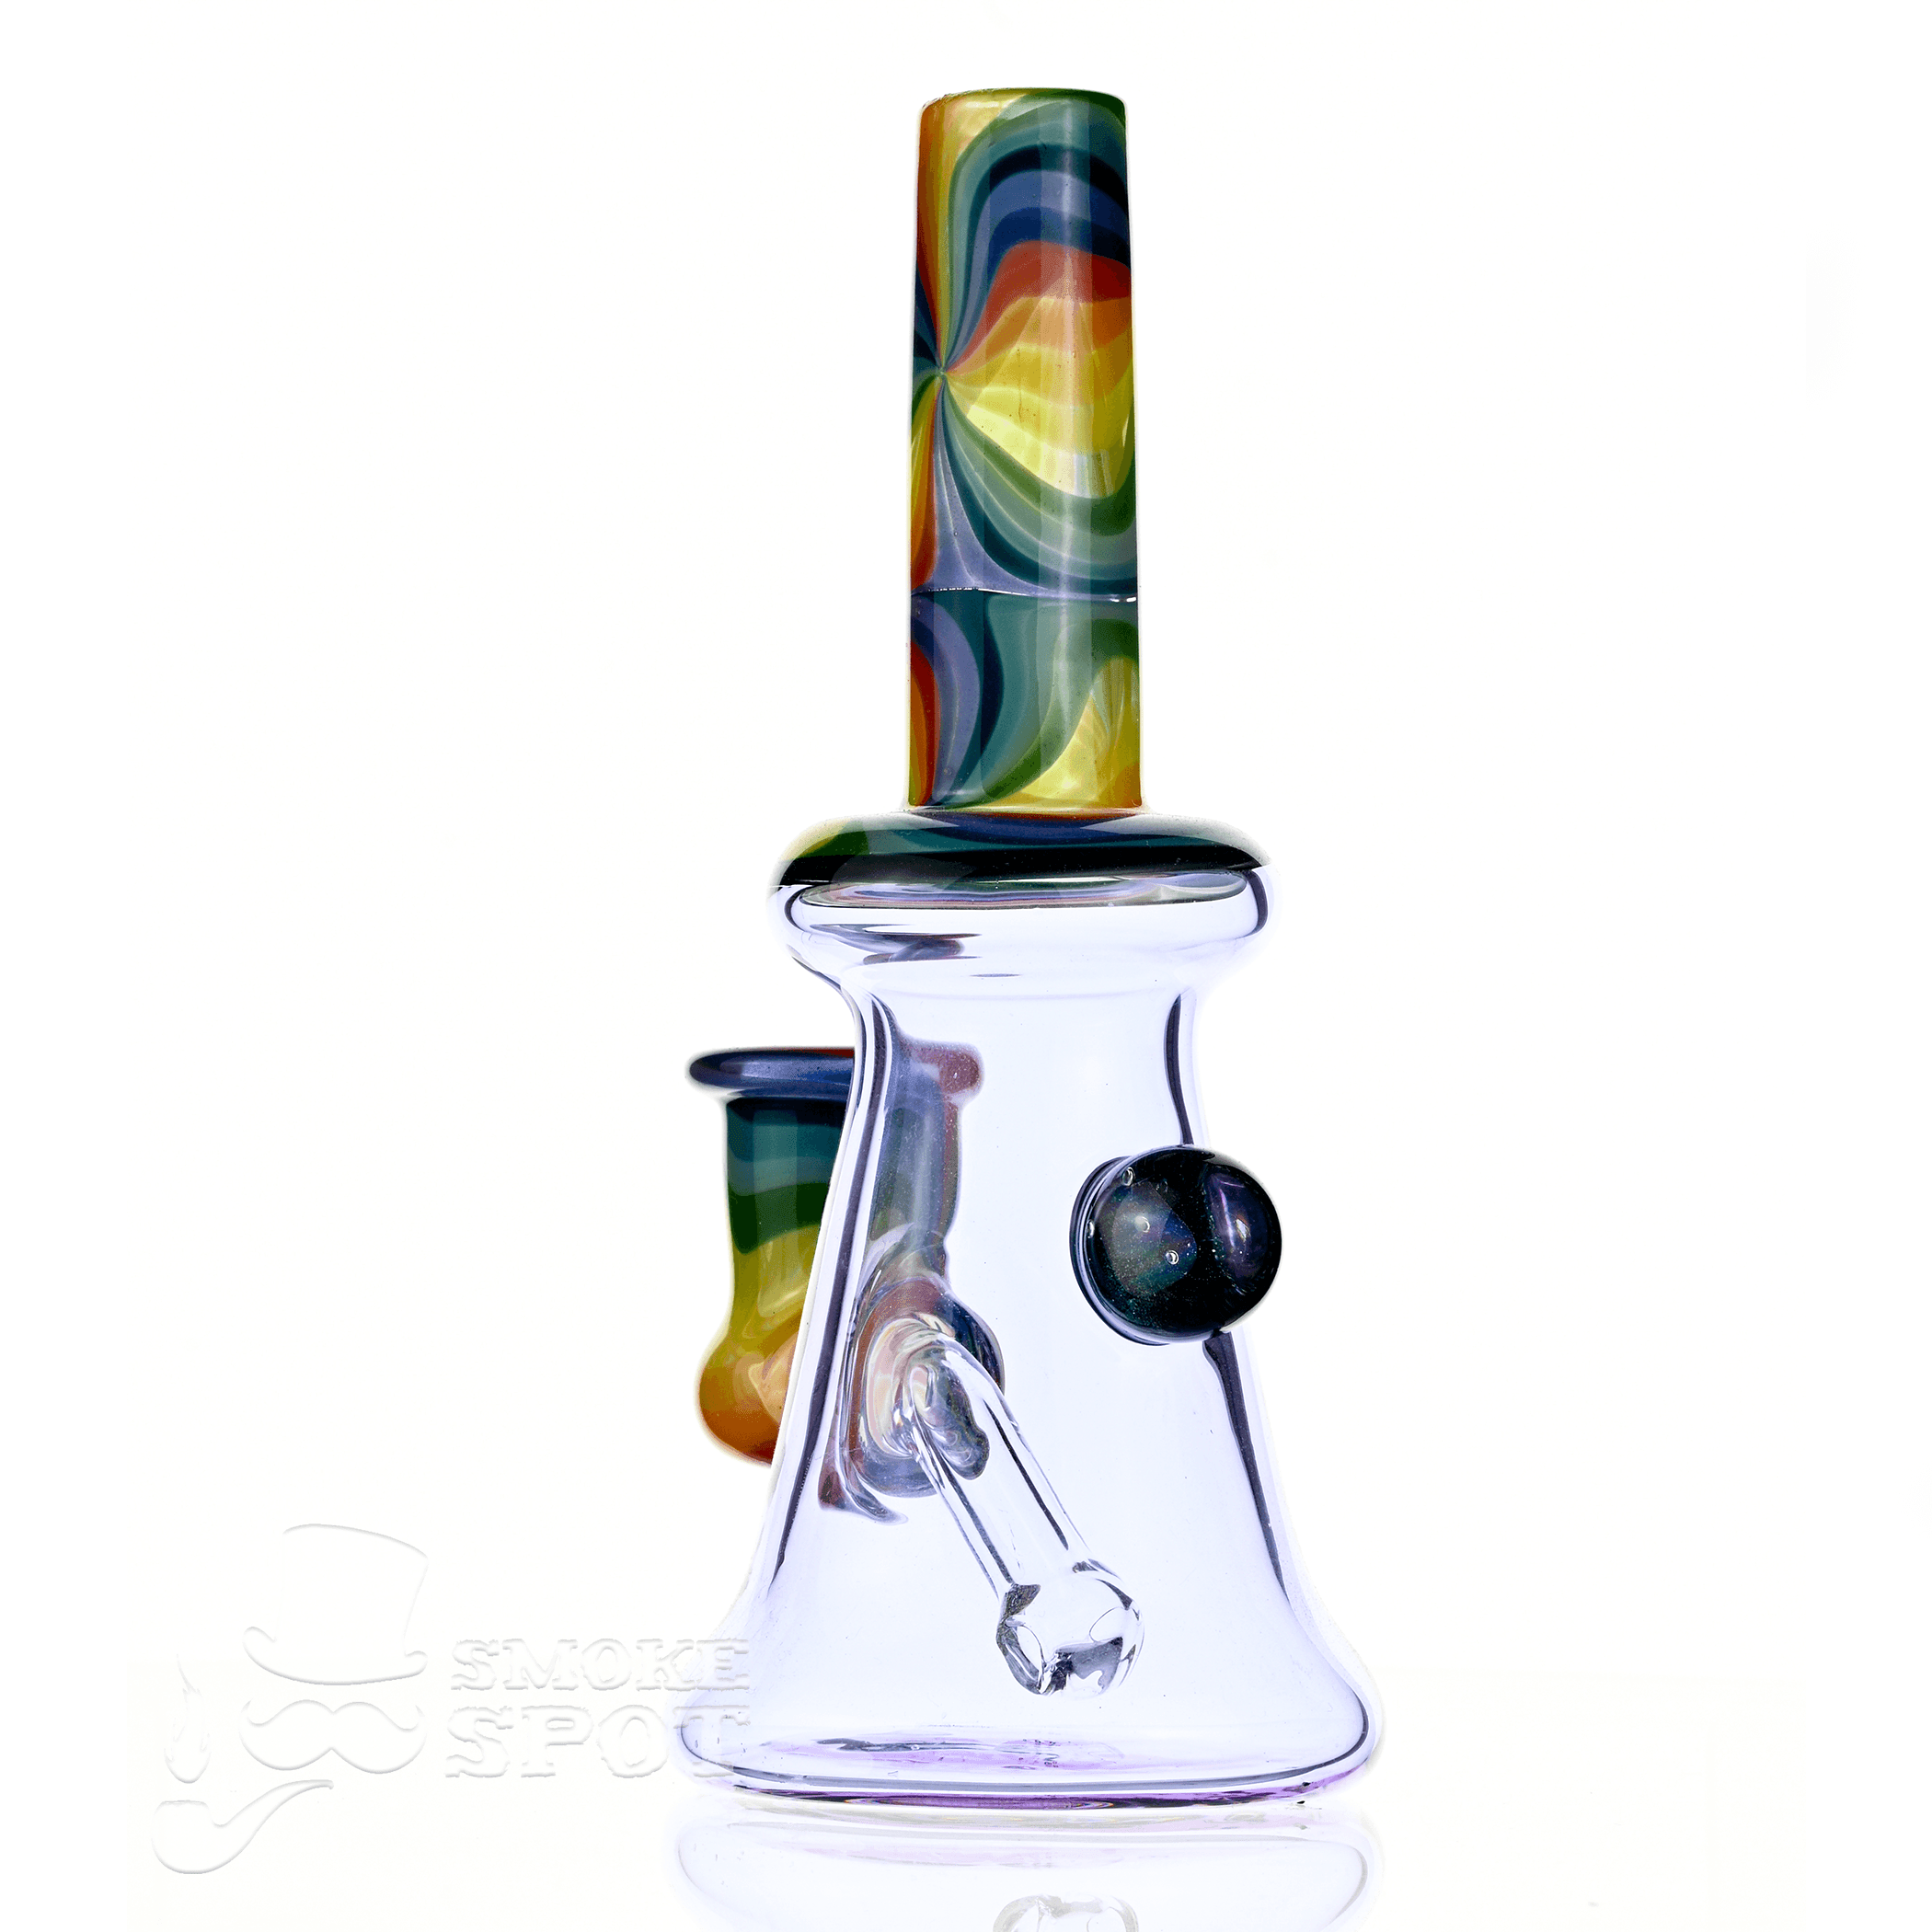 Smoky Mountain Glass Waterpipe 2 kind rig rainbow color with opal